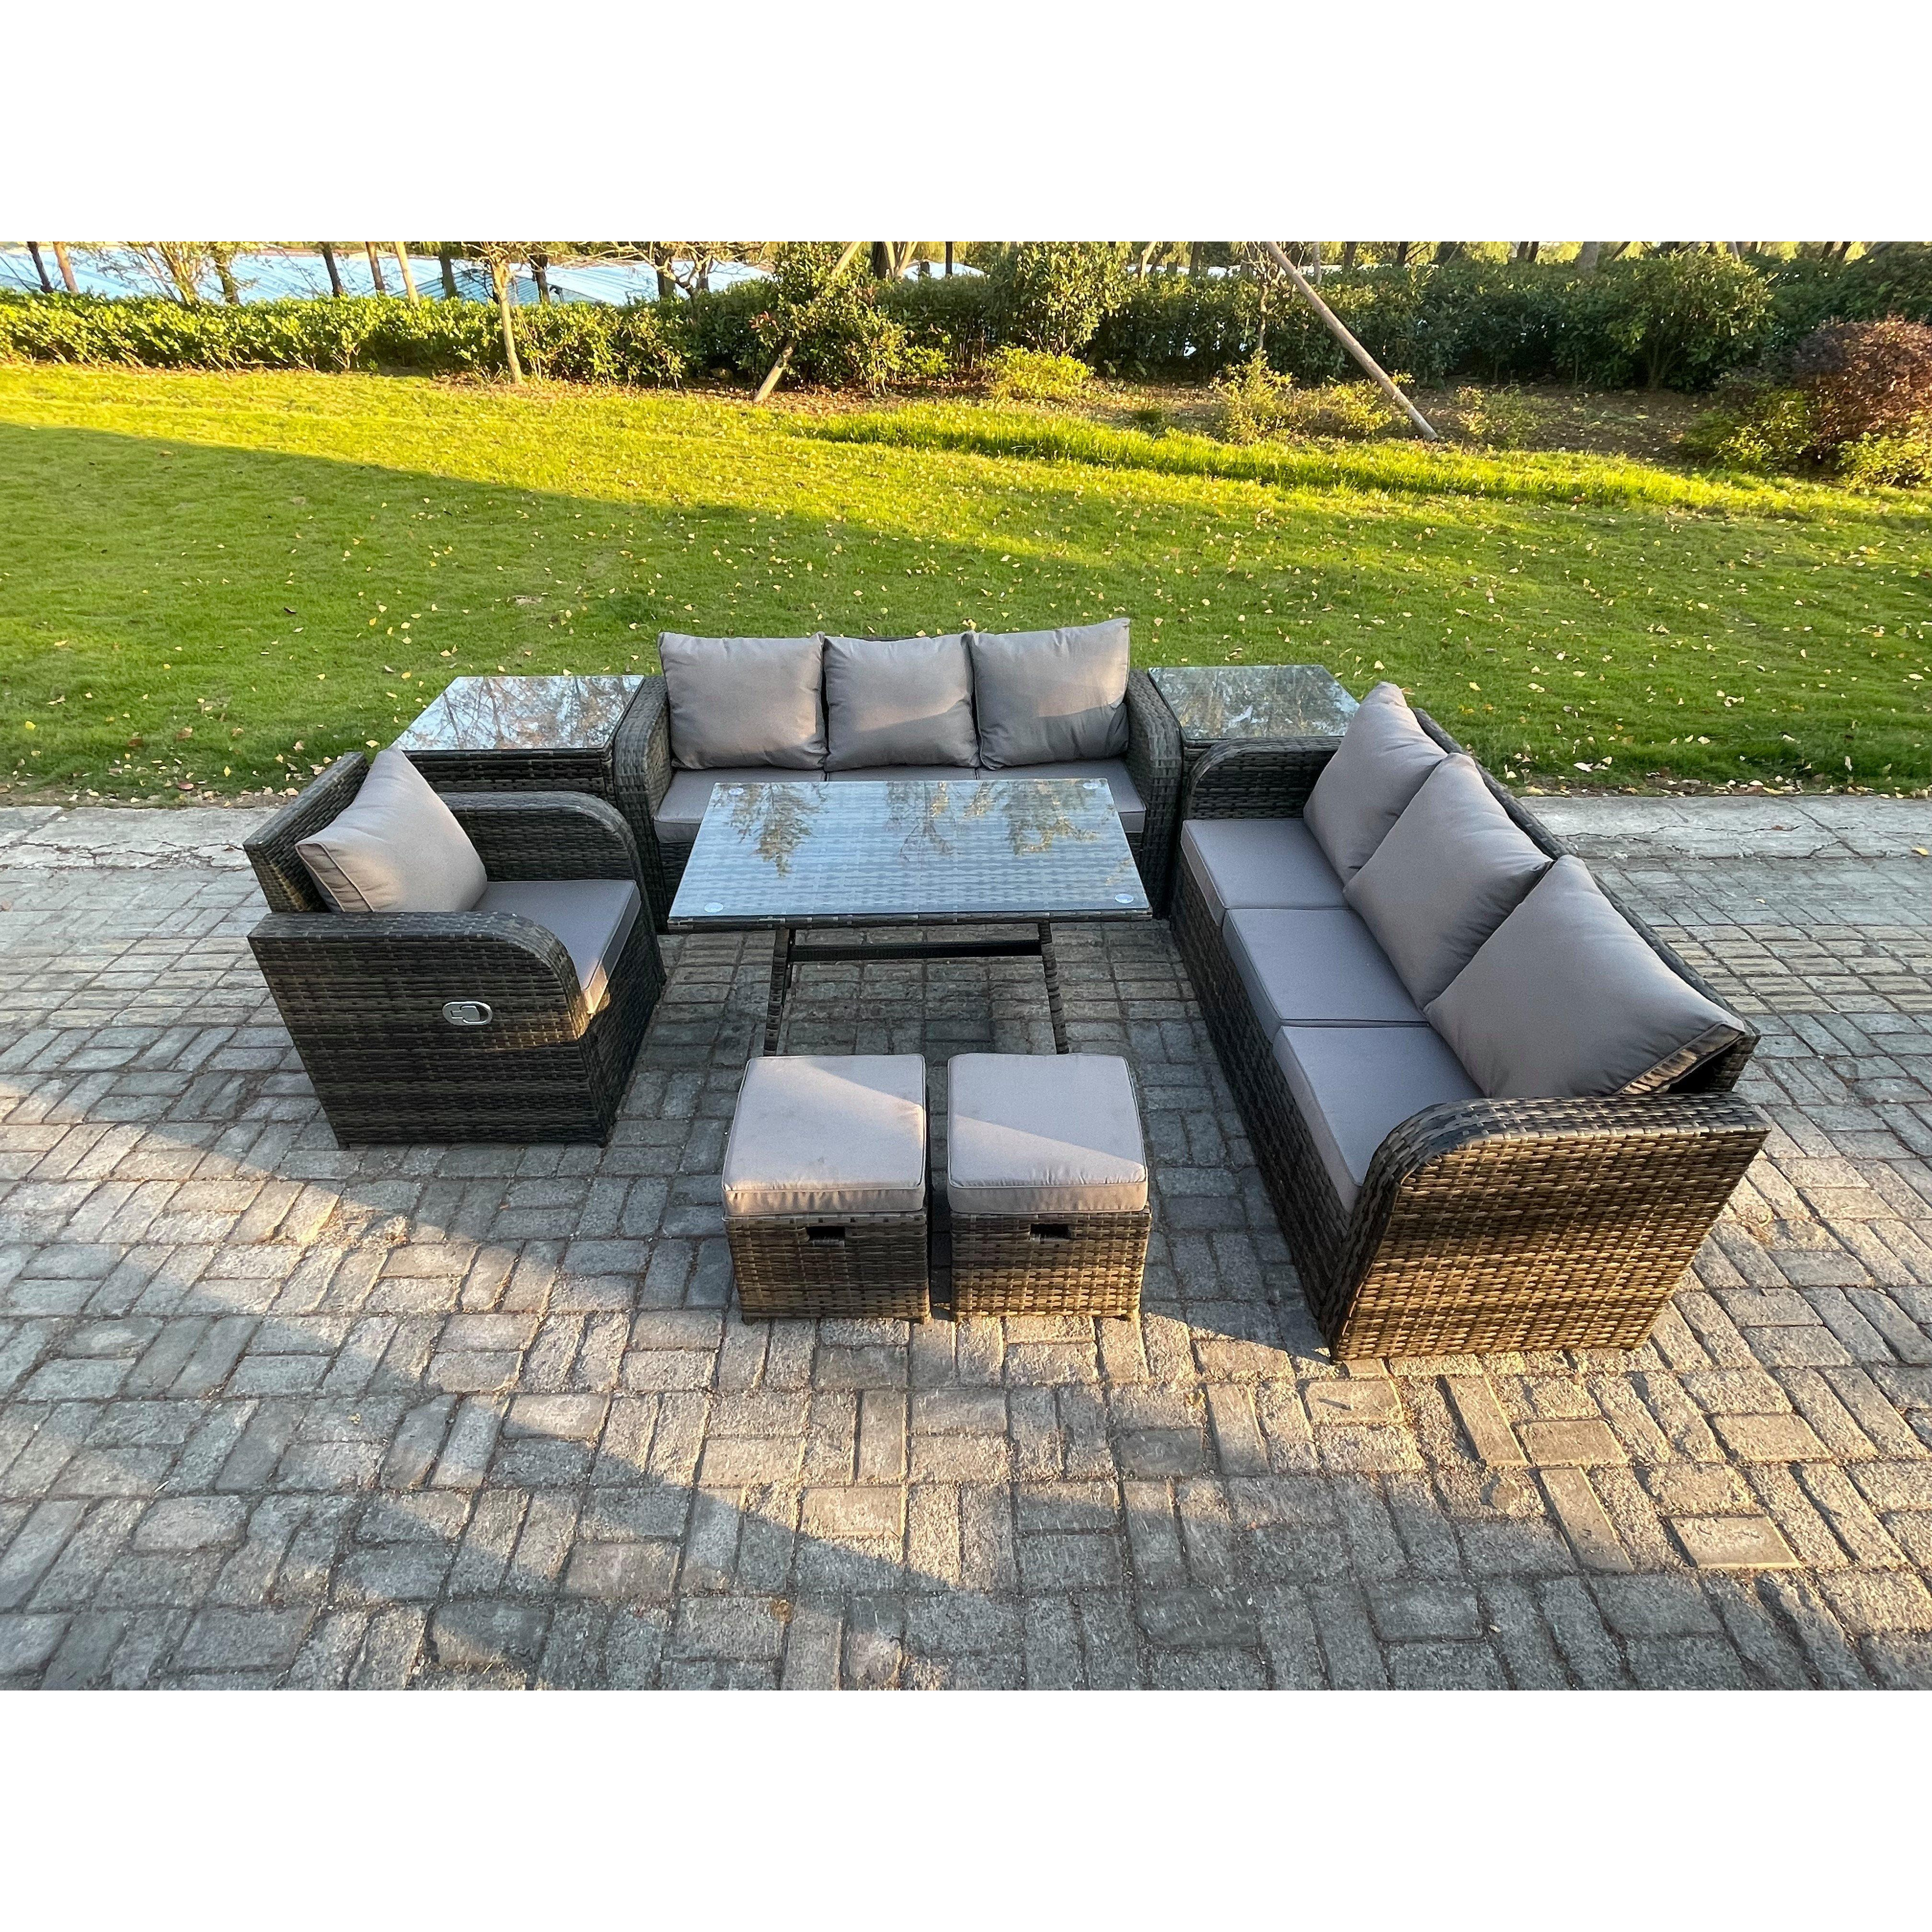 Wicker 8 Pieces Rattan Garden Furniture Sofa Set with Rectangular Dining Table Armchair 2 Small Footstools 2 Side Tables Dark Grey Mixed - image 1